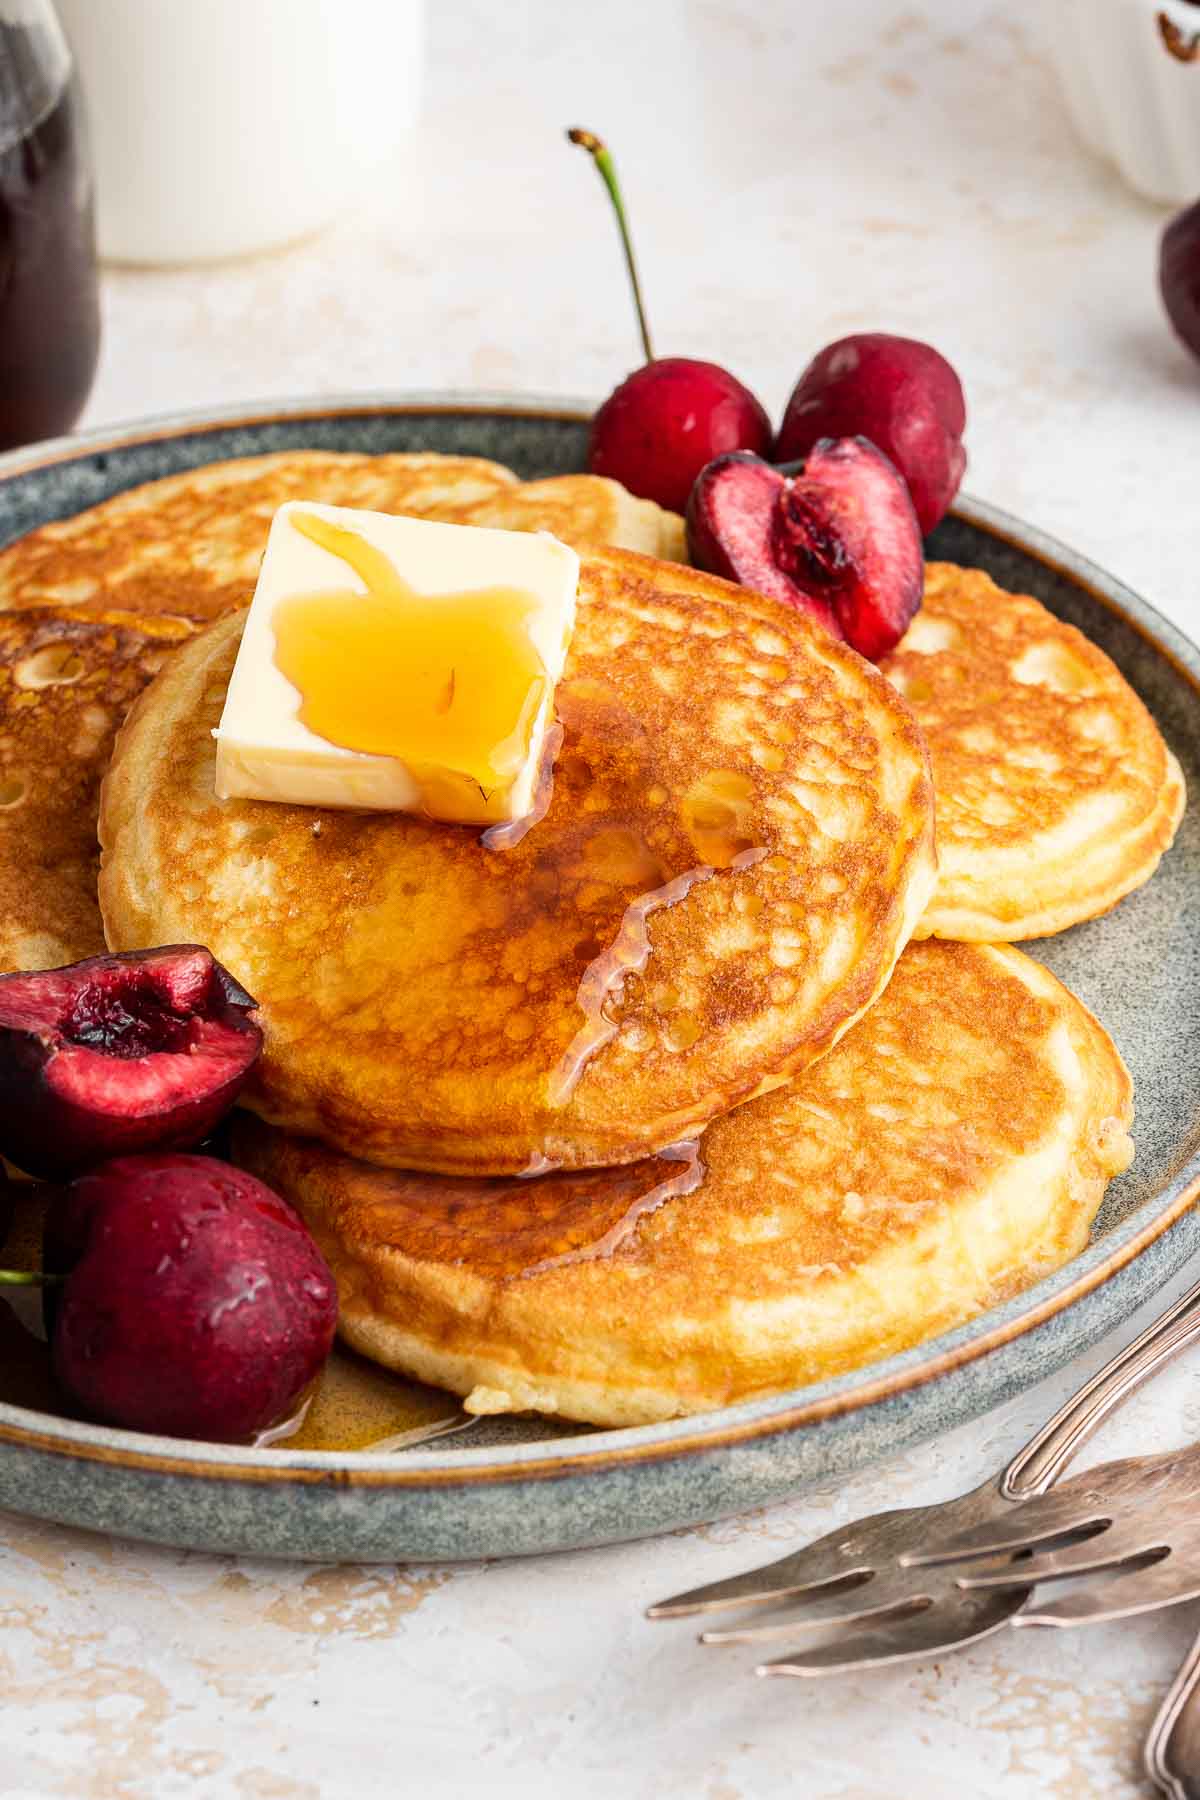 Plate of round pancakes with fresh cherries and butter on top.